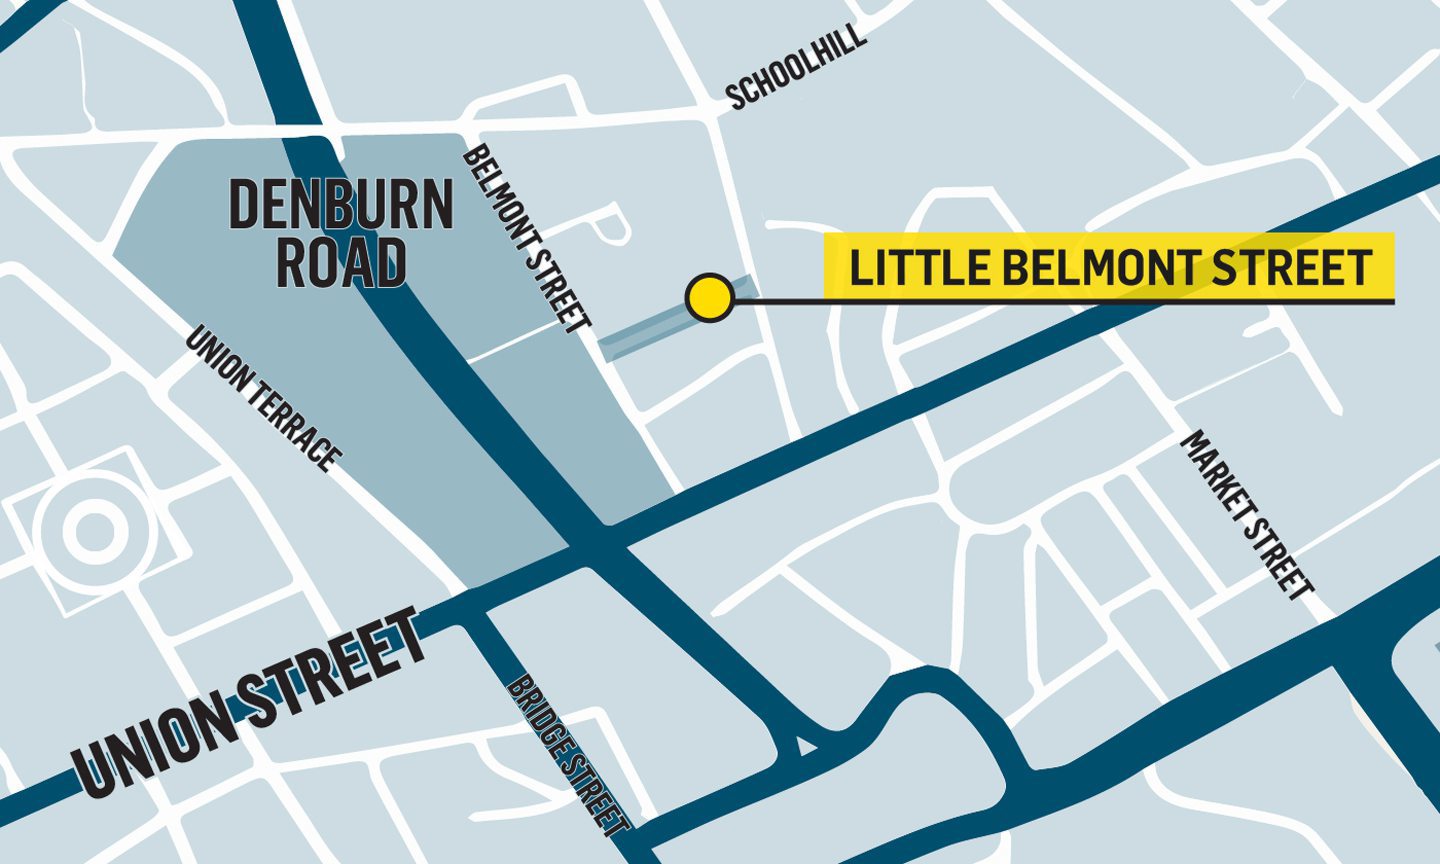 Map showing where Alistair Greig's office was in Aberdeen's Little Belmont Street for his business Midas Financial Solutions (Scotland) Ltd.